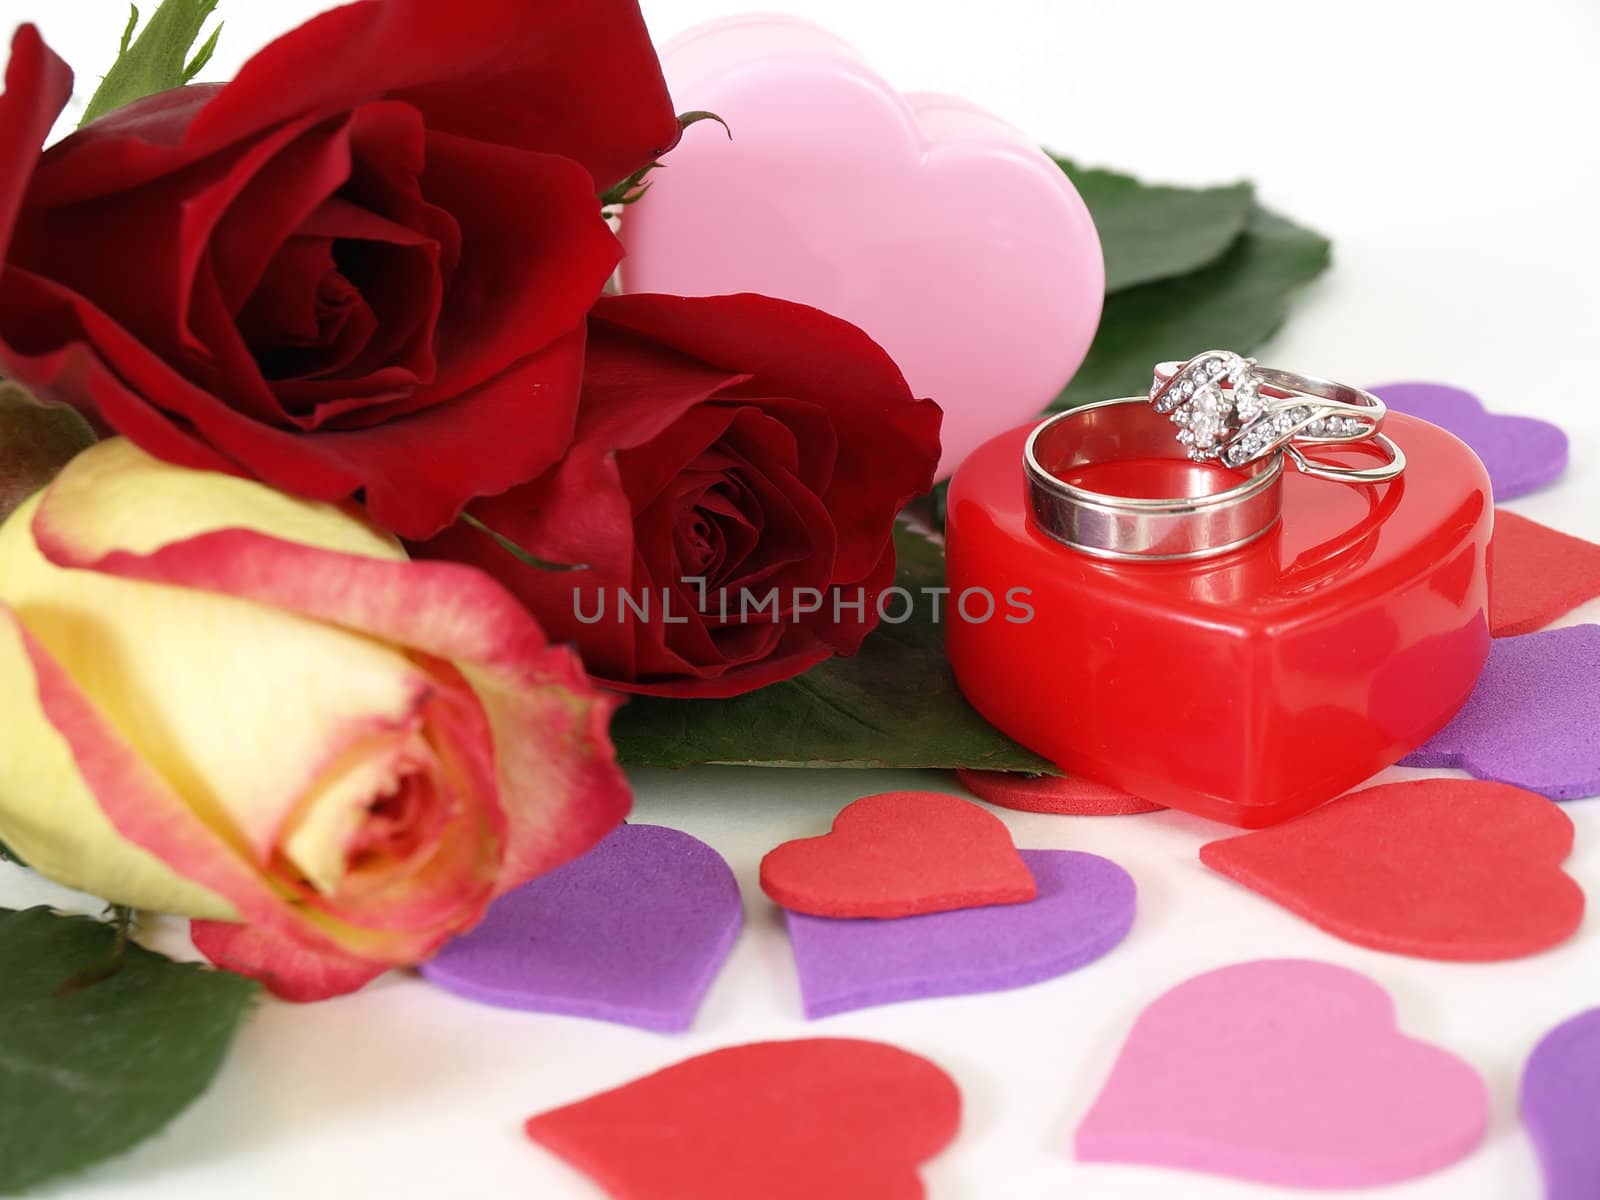 Wedding rings sit atop a red plastic box. Three roses lay next to it, various heart shapes scattered around.